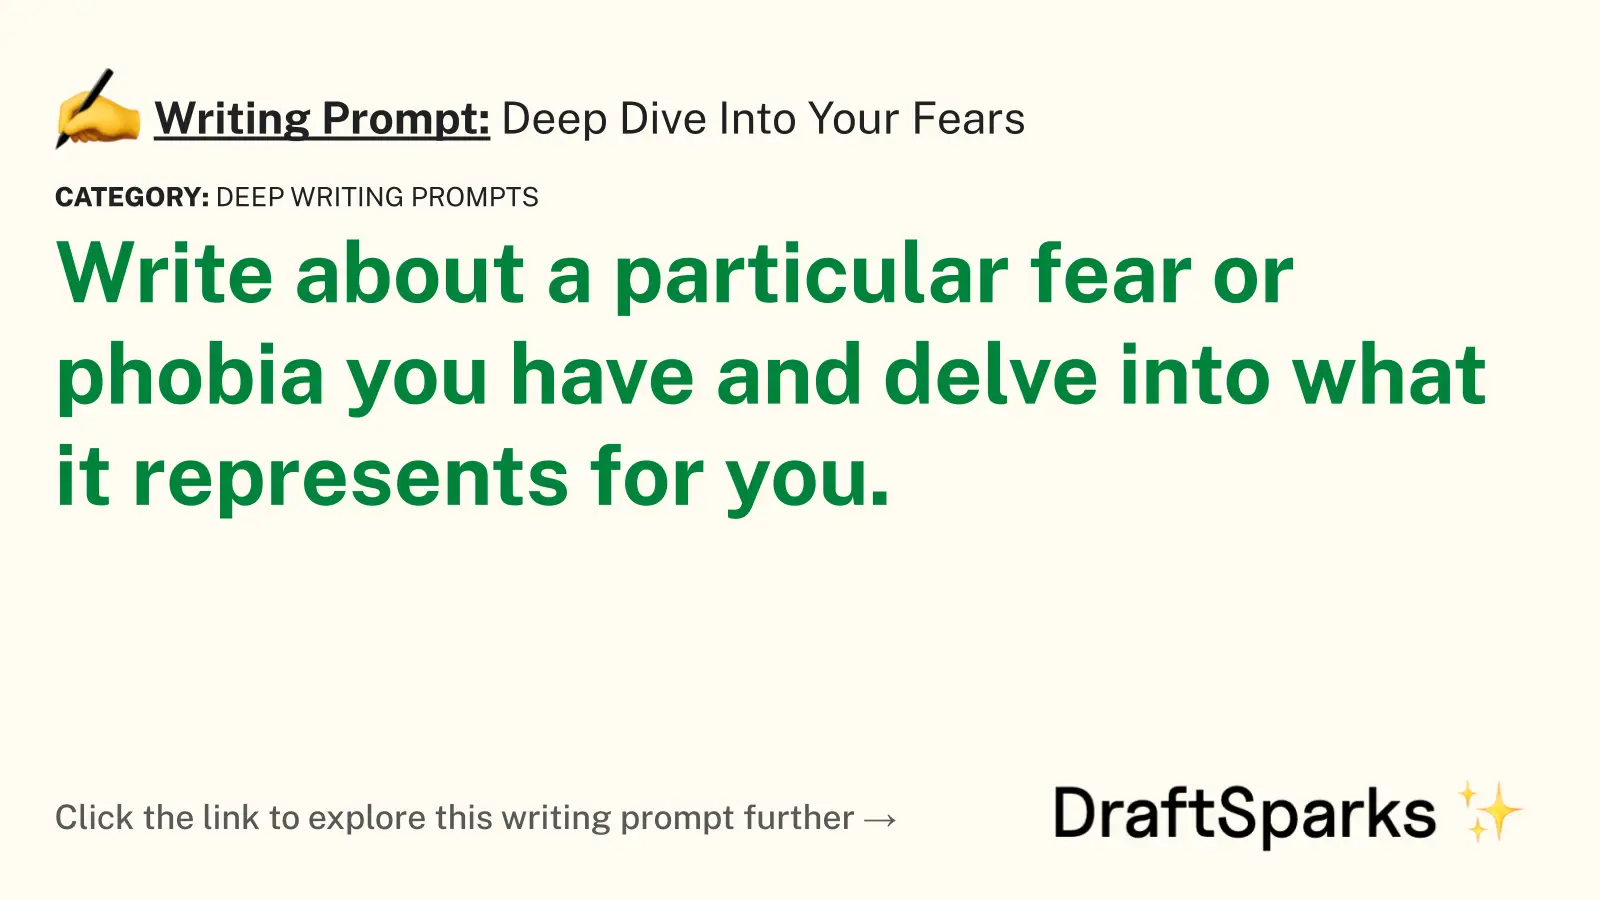 Deep Dive Into Your Fears